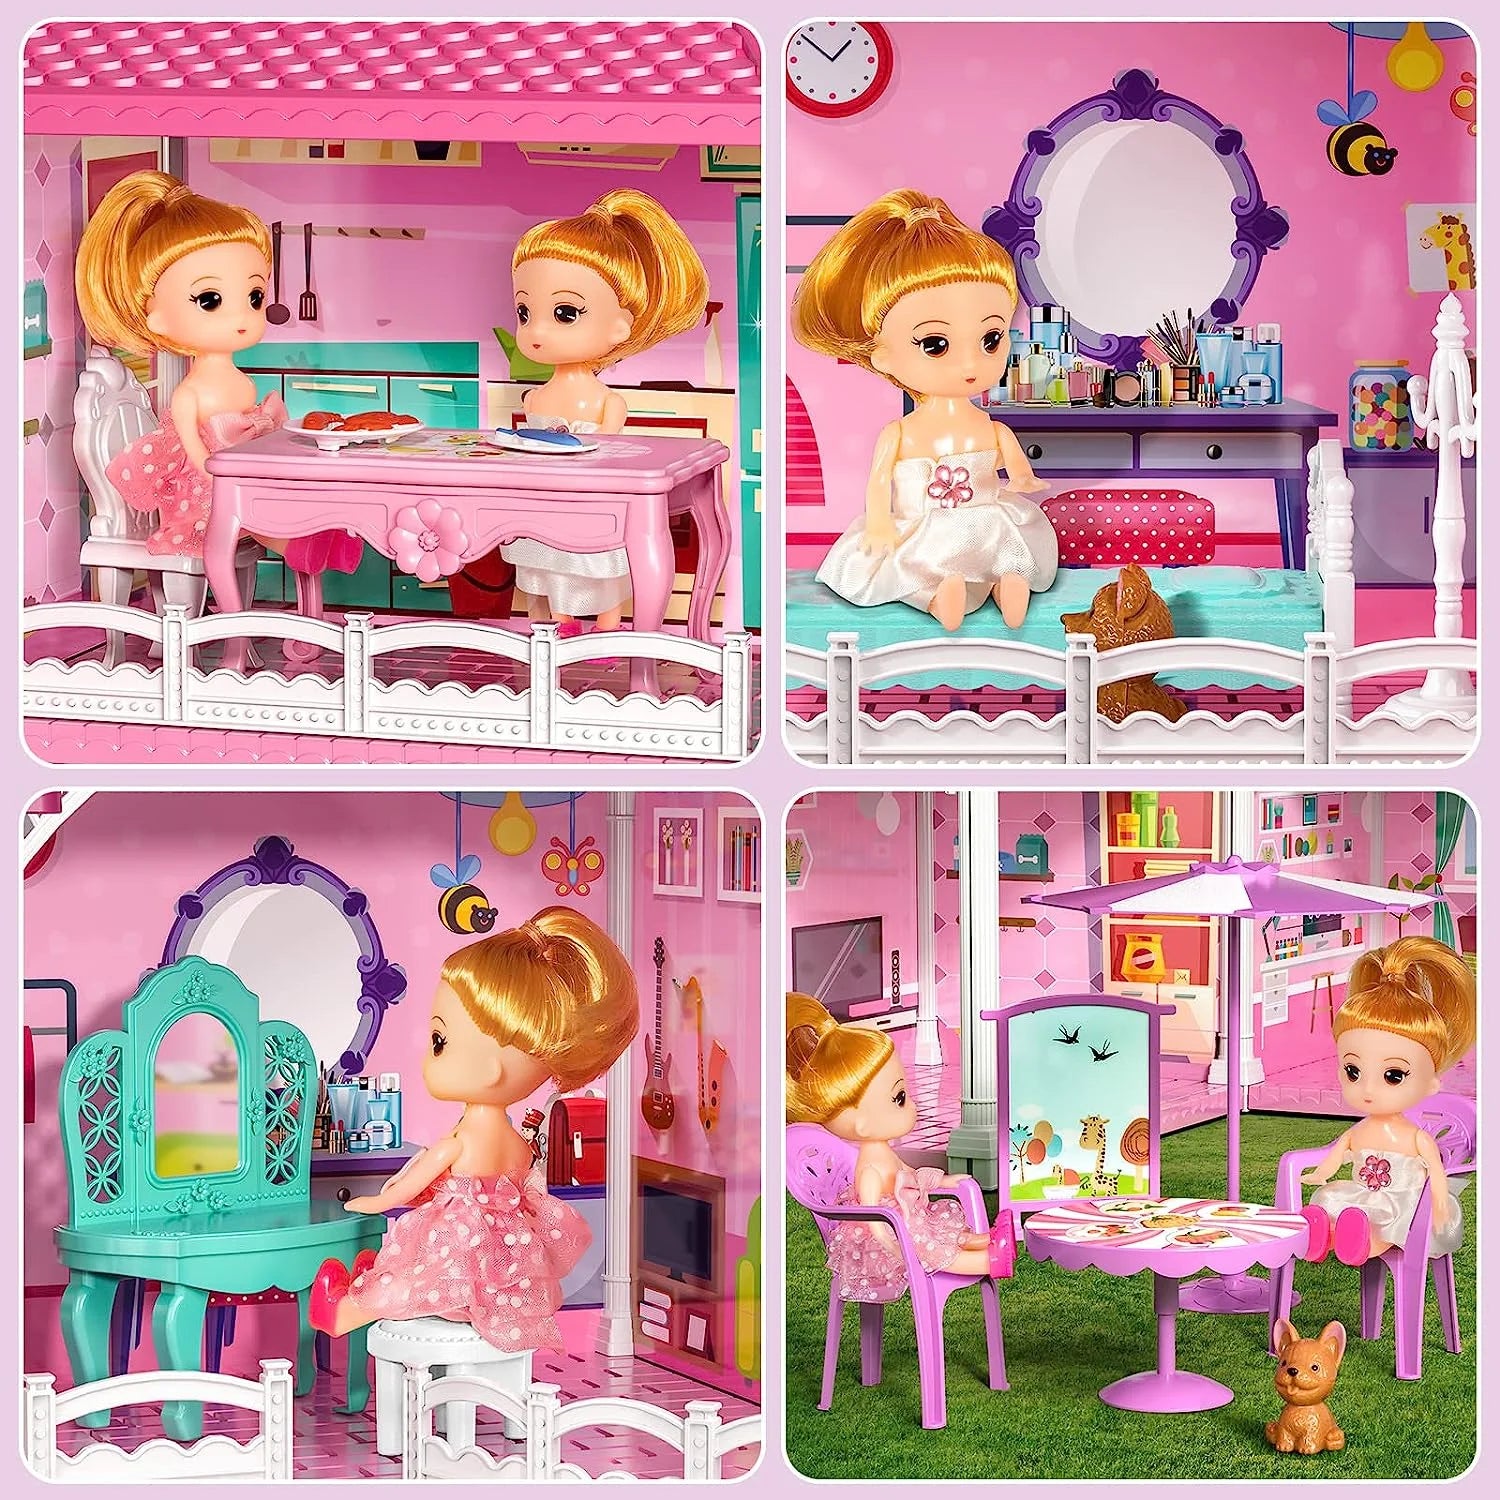 Doll House Toddler Toys for 3 4 5 6 Years Old for Girls 3-Story 6 Rooms Play house with 2 Dolls Toy Figures Dream House